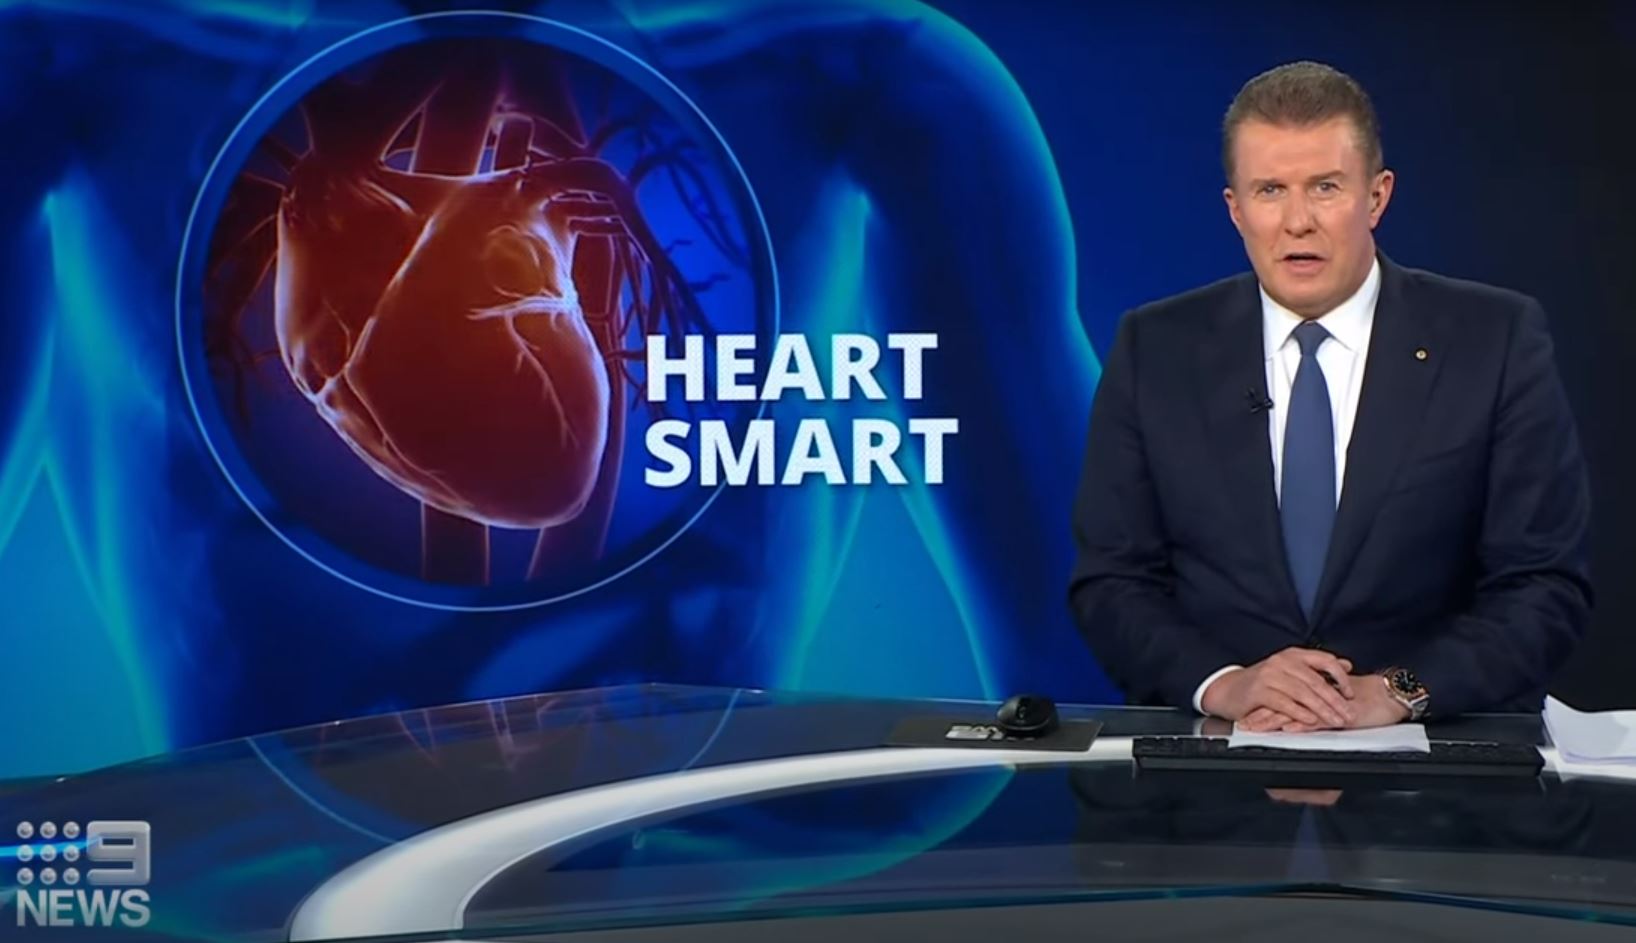 Australian technology, receives media attention from 9 News Australia for significantly enhancing the diagnosis of a form of heart